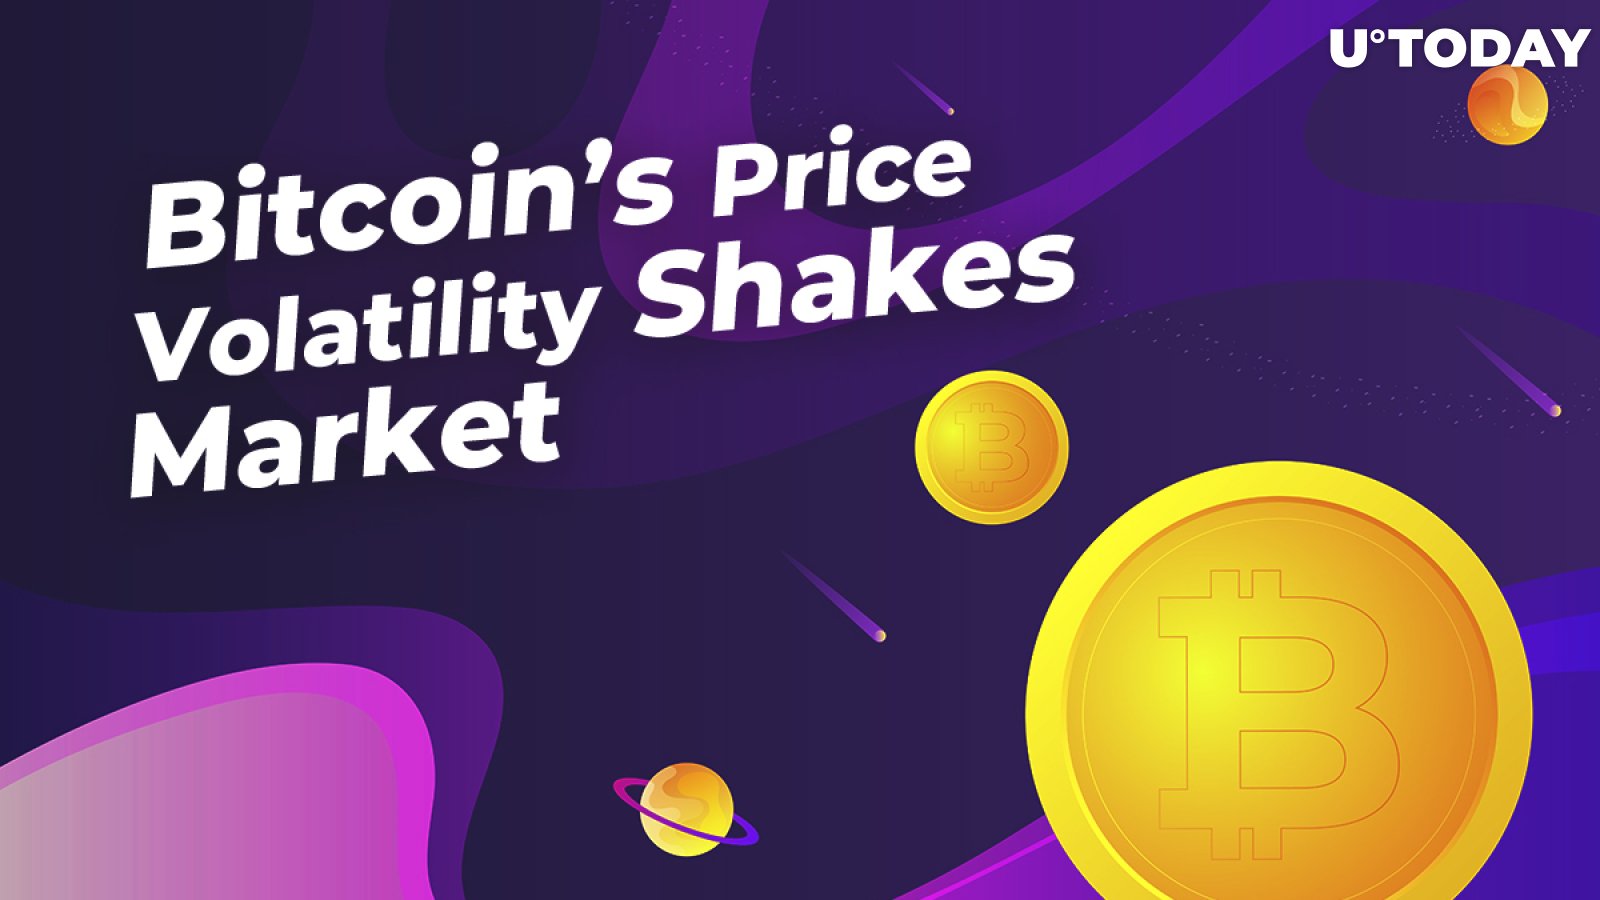 Bitcoin’s Price Volatility Shakes Market Leaving Most Coins in the Red - A Big Concern, or Simple Correction?